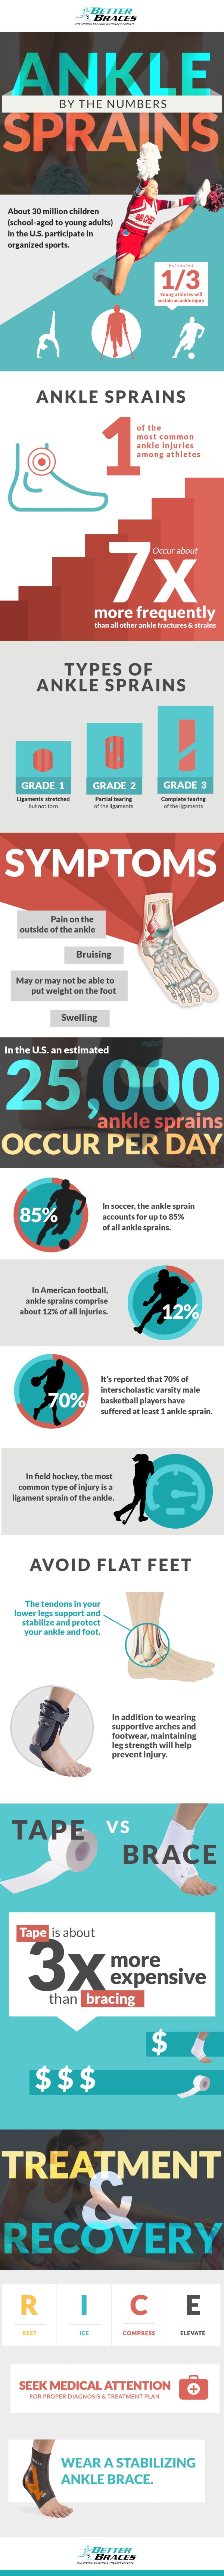 ankle sprains infographic